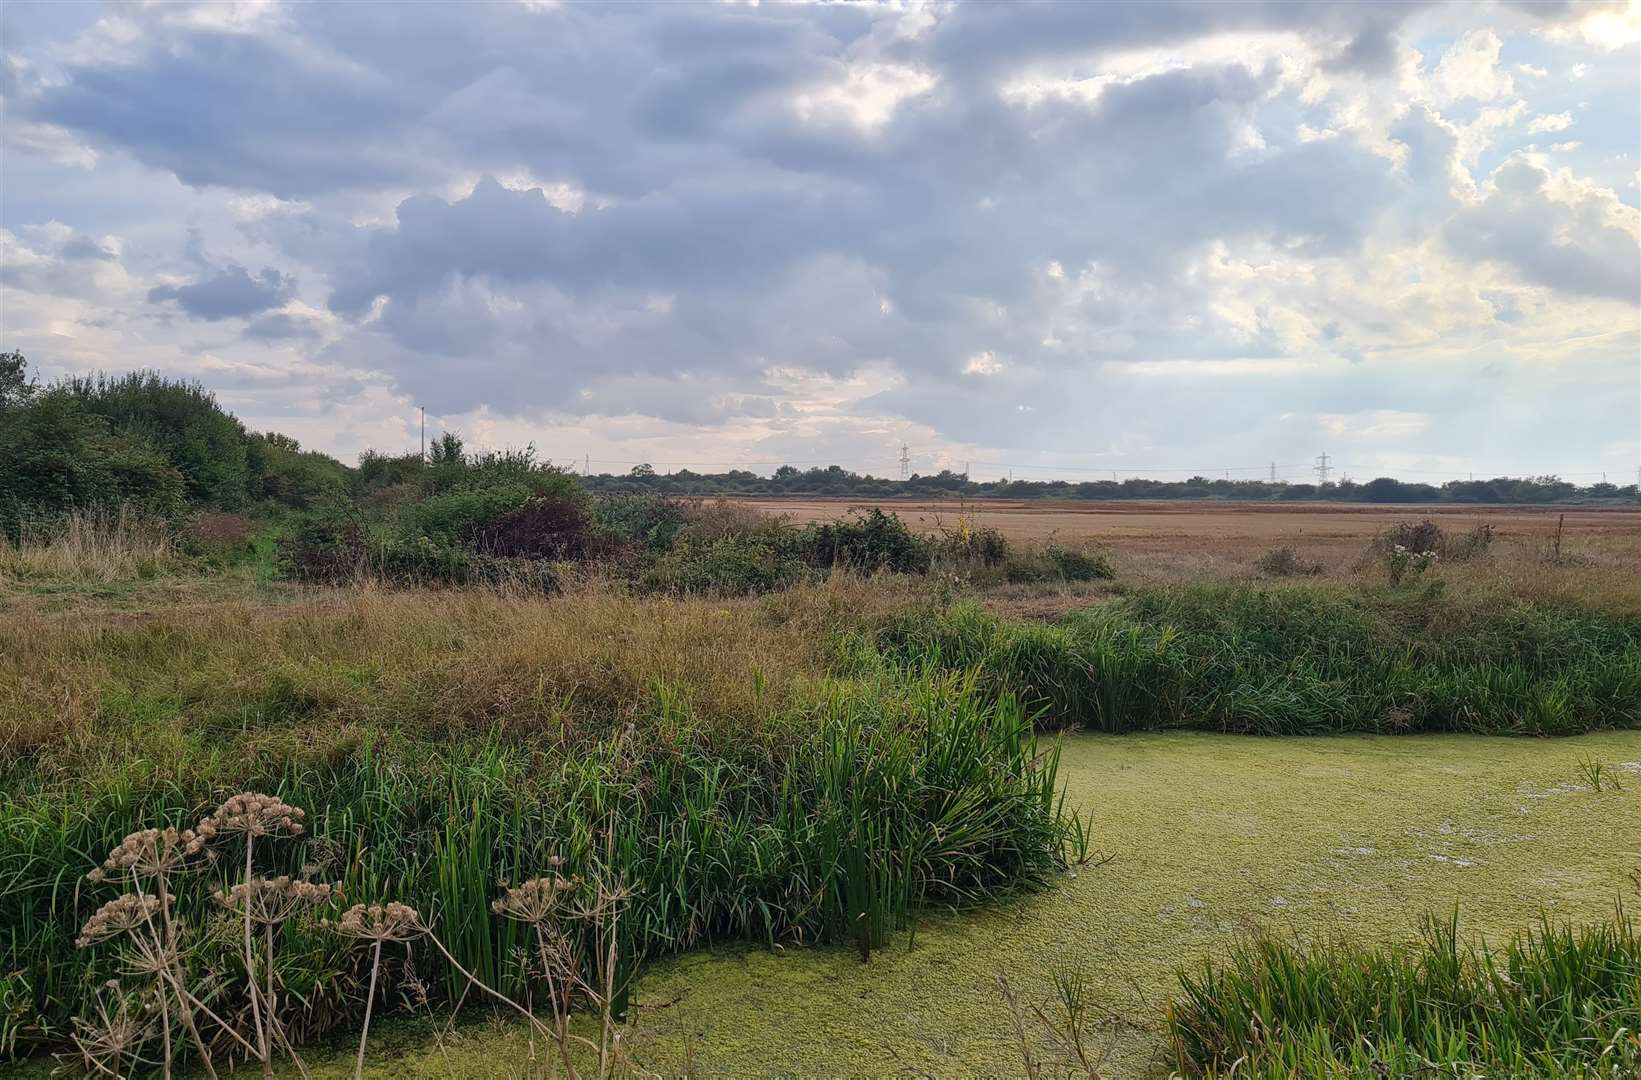 Campaigners says Minster marshes are a precious refuge for wildlife